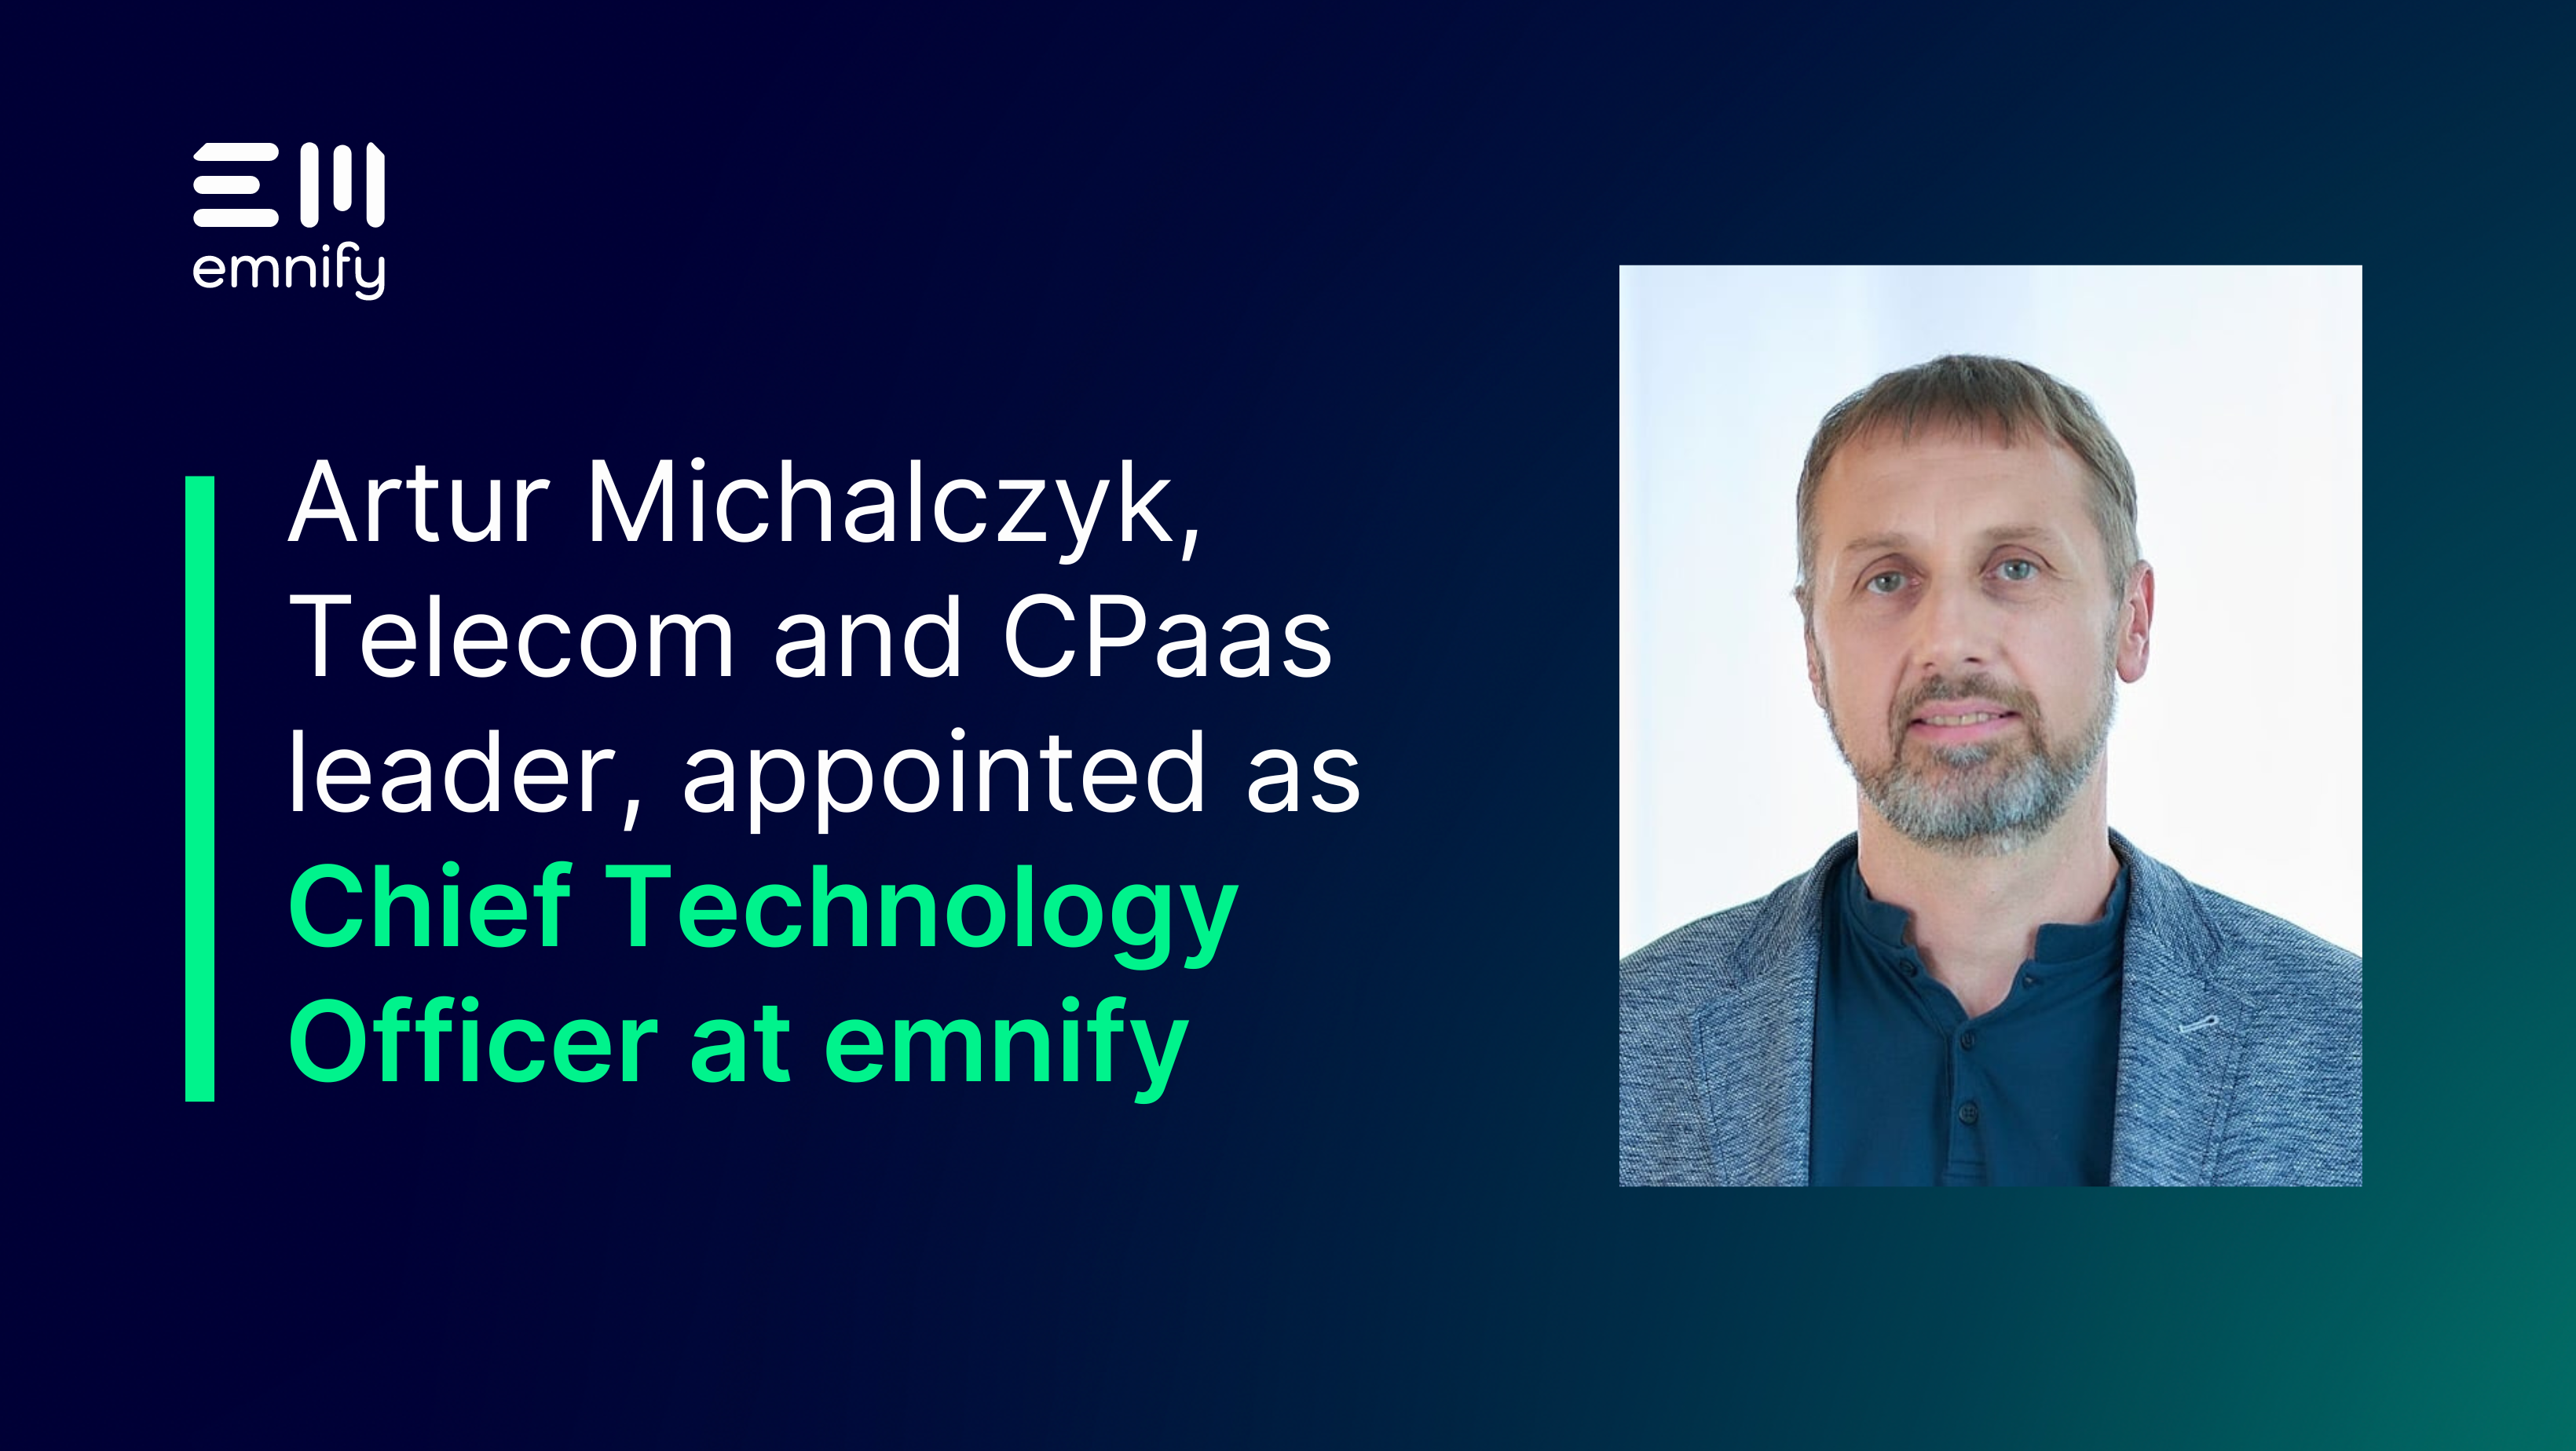 Feature image for Artur+Michalczyk%2C+Telecom+and+CPaaS+leader%2C+appointed+as+Chief+Technology+Officer+at+emnify